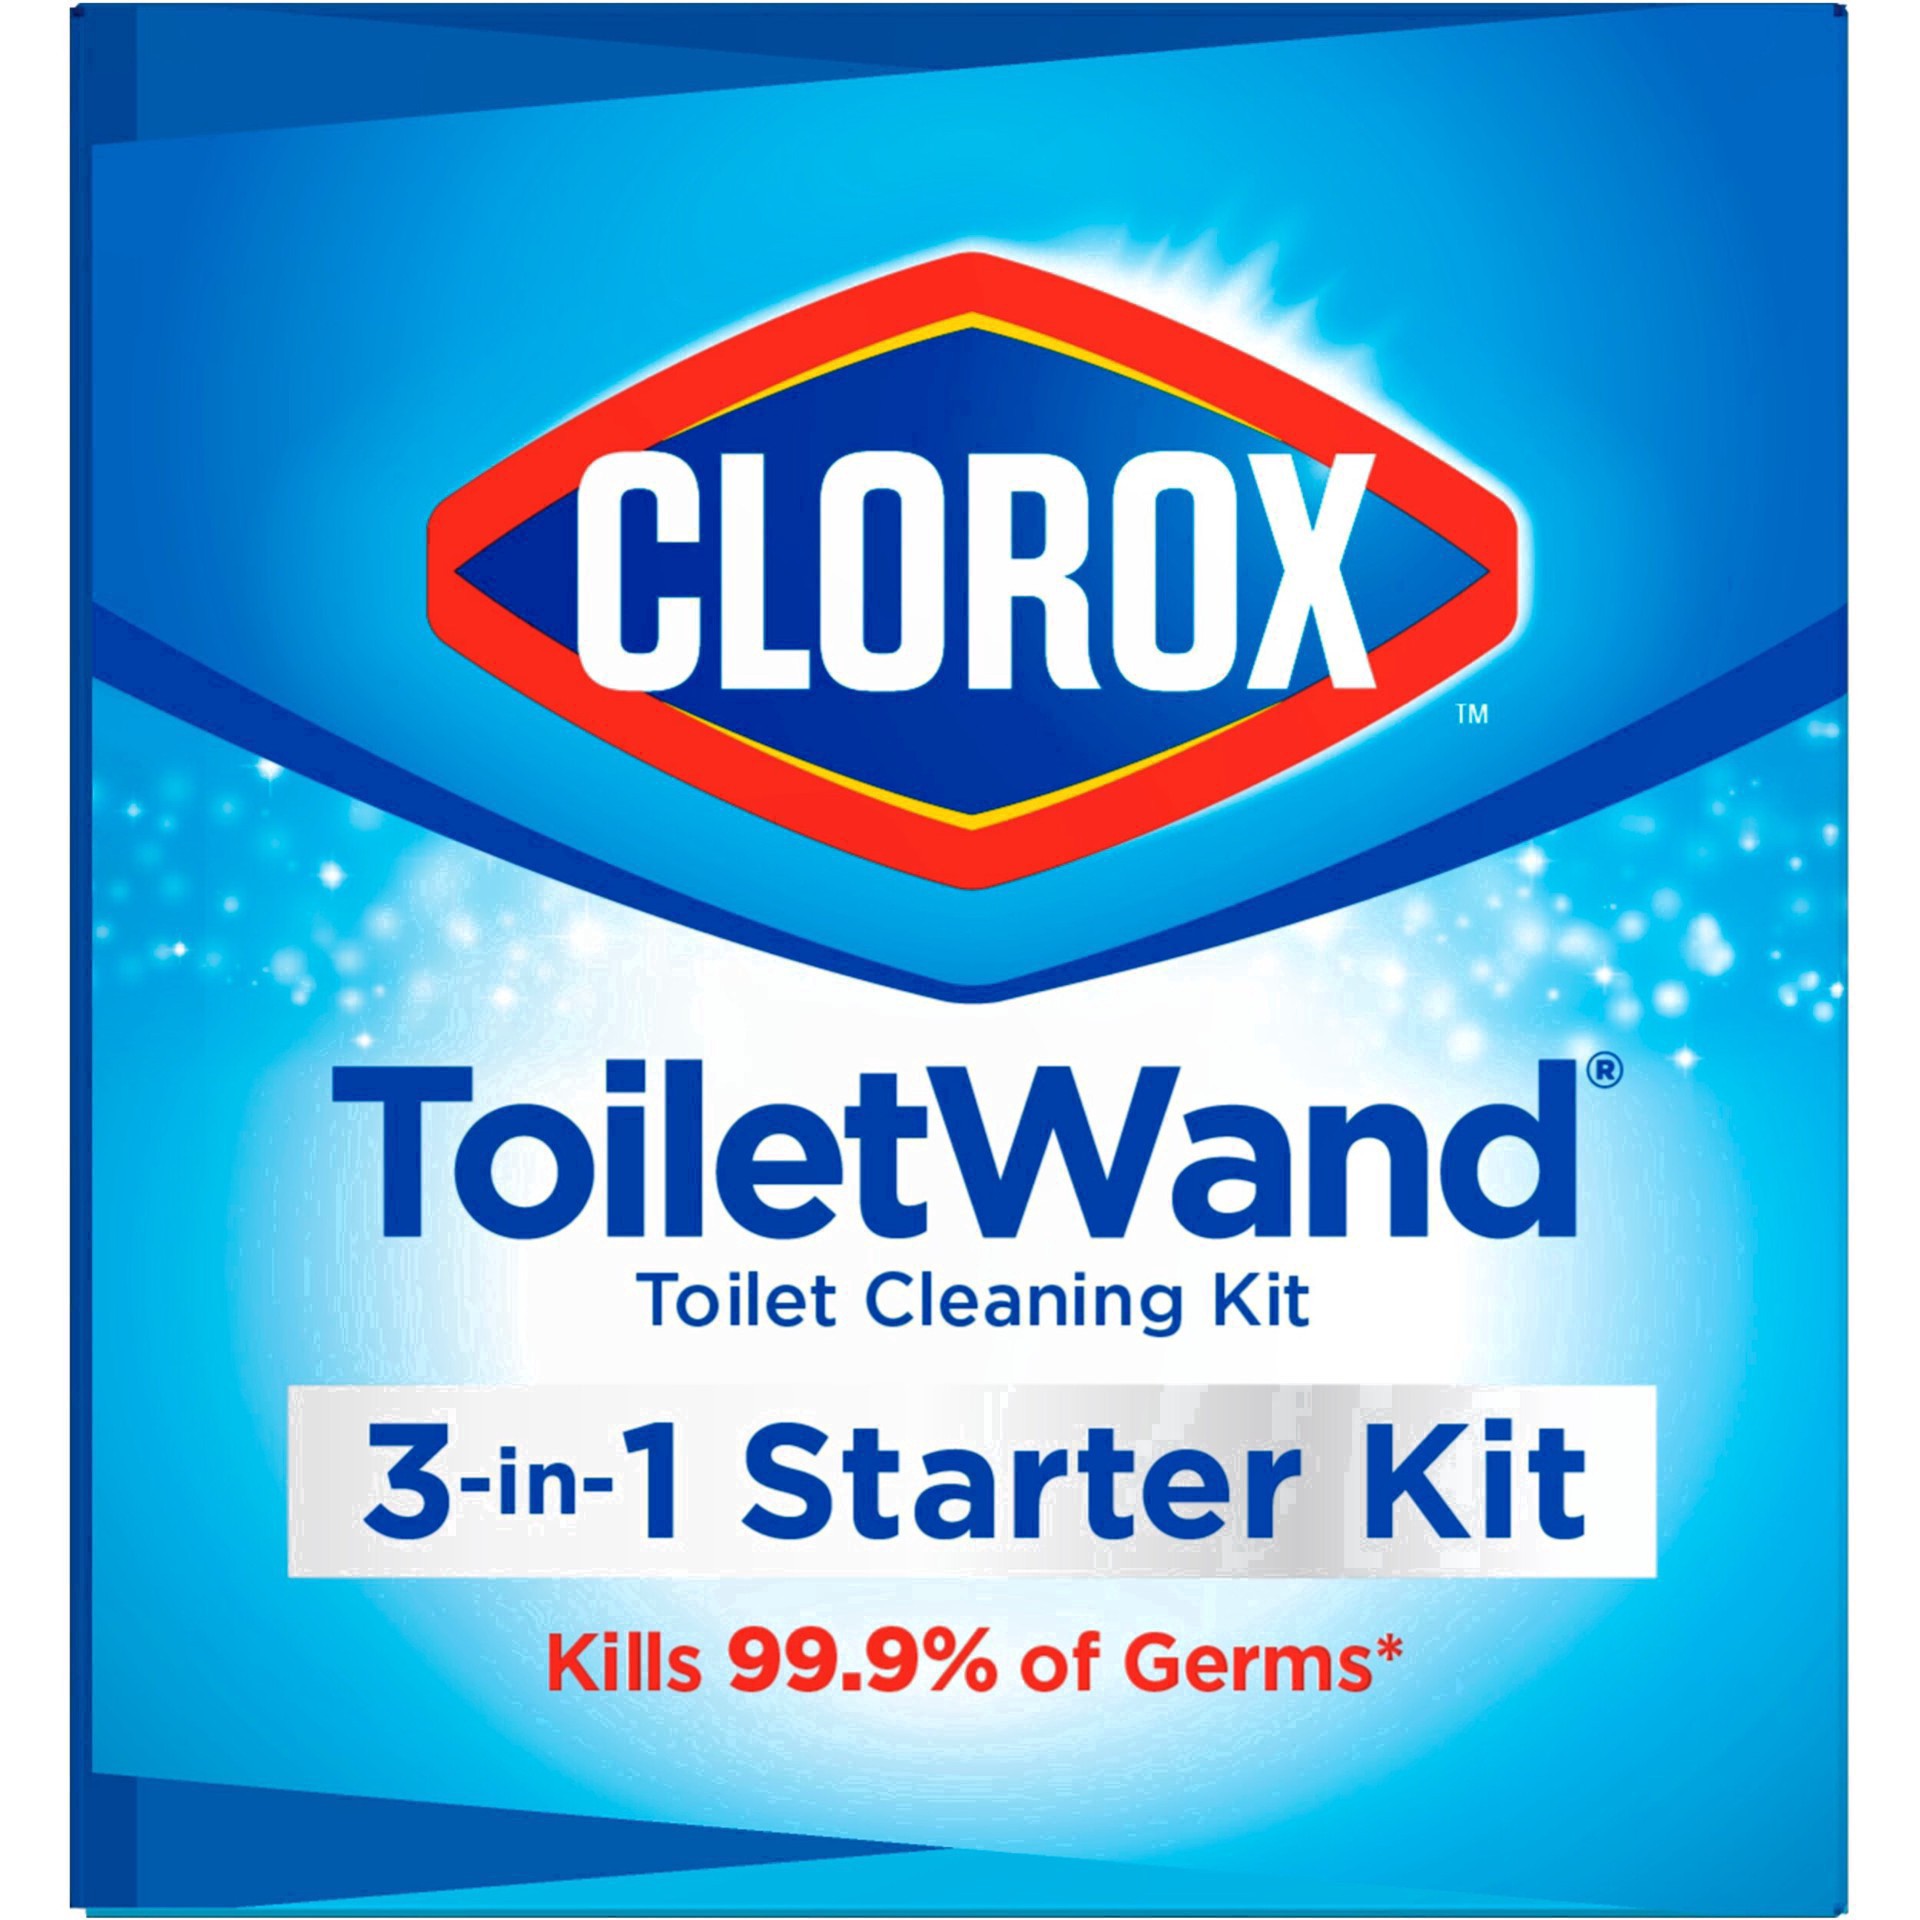 slide 59 of 176, Clorox Toilet Wand 3-in-1 Starter Toliet Cleaning Kit, 1 ct